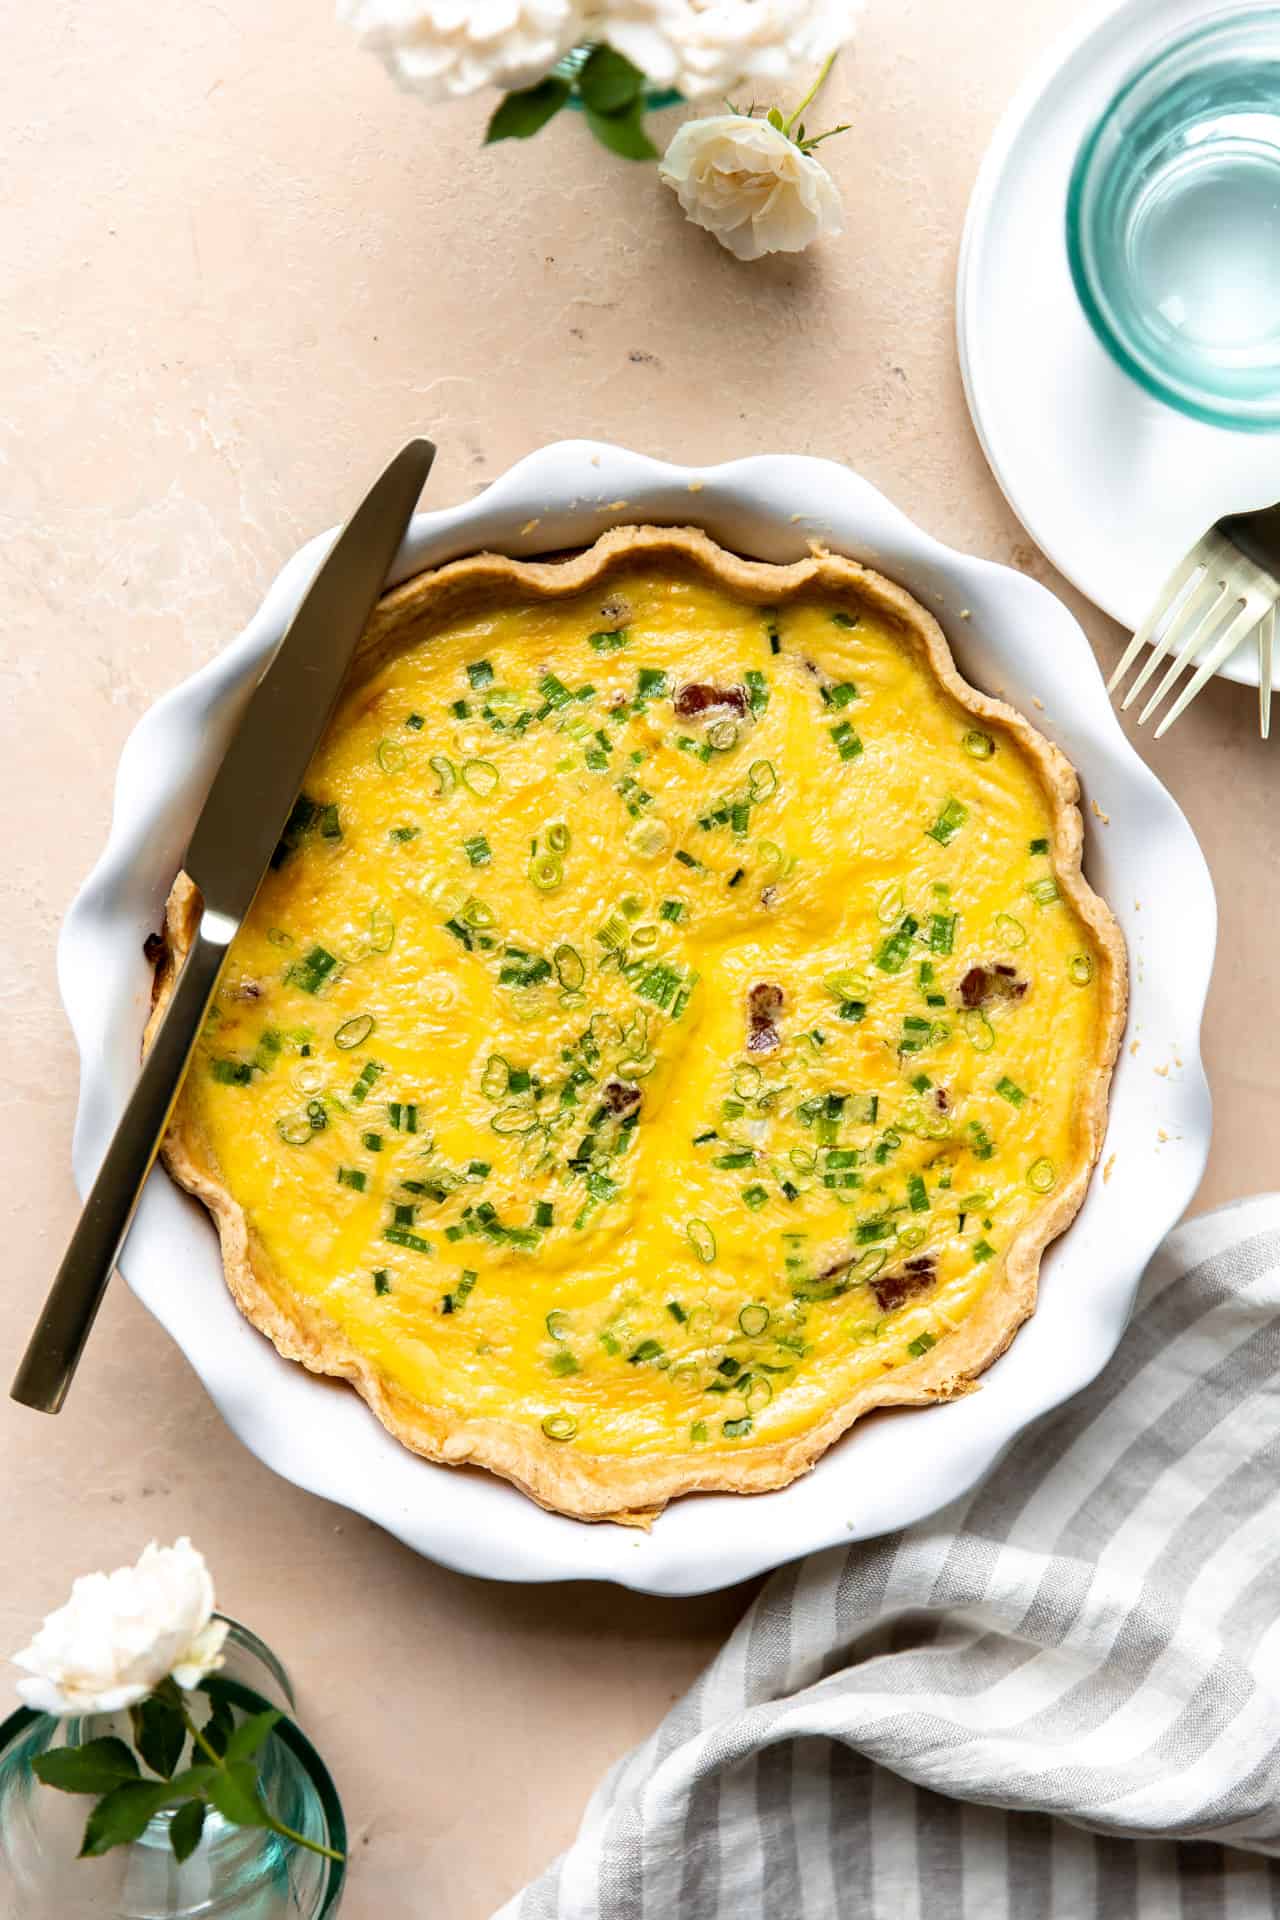 Basic Quiche Recipe (using any filling of your choice!) - House of Yumm